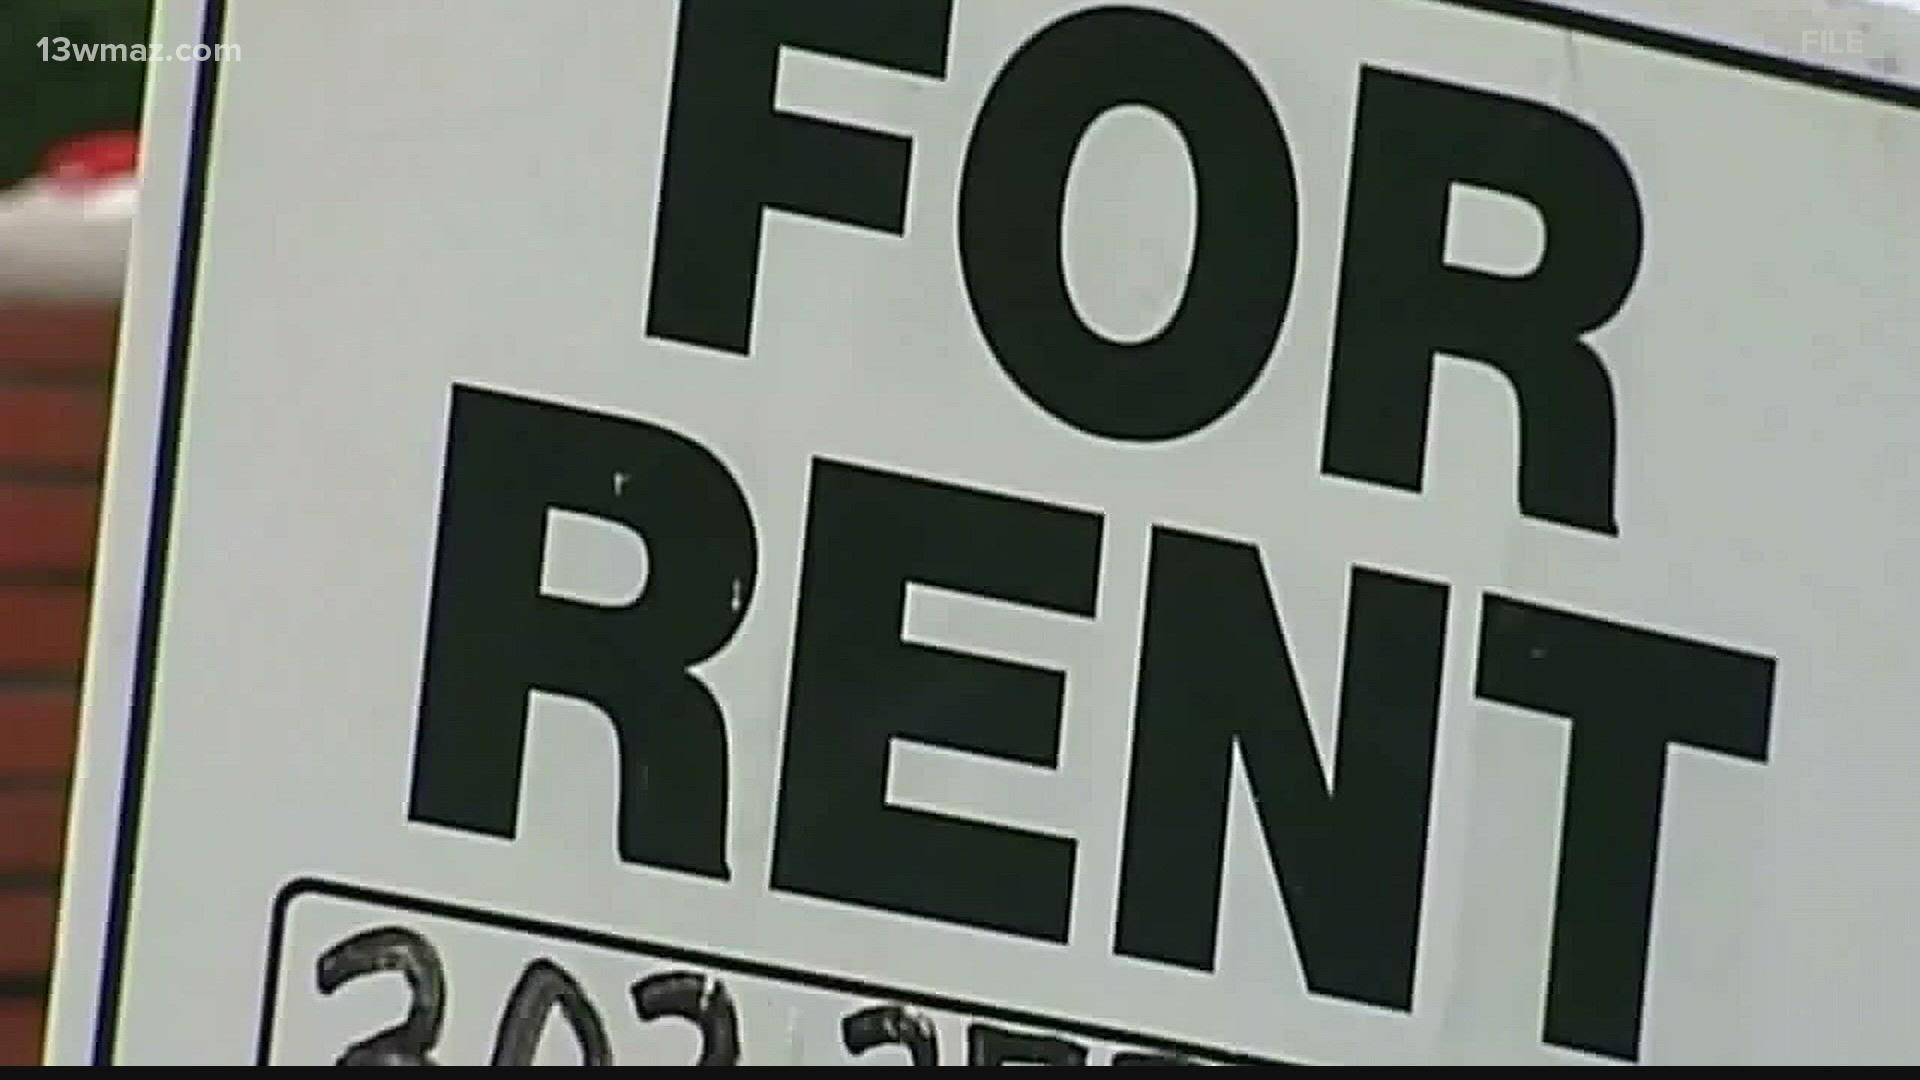 A statewide law firm serving low-income communities across Georgia will be in Houston County Saturday offering free resources to help renters.